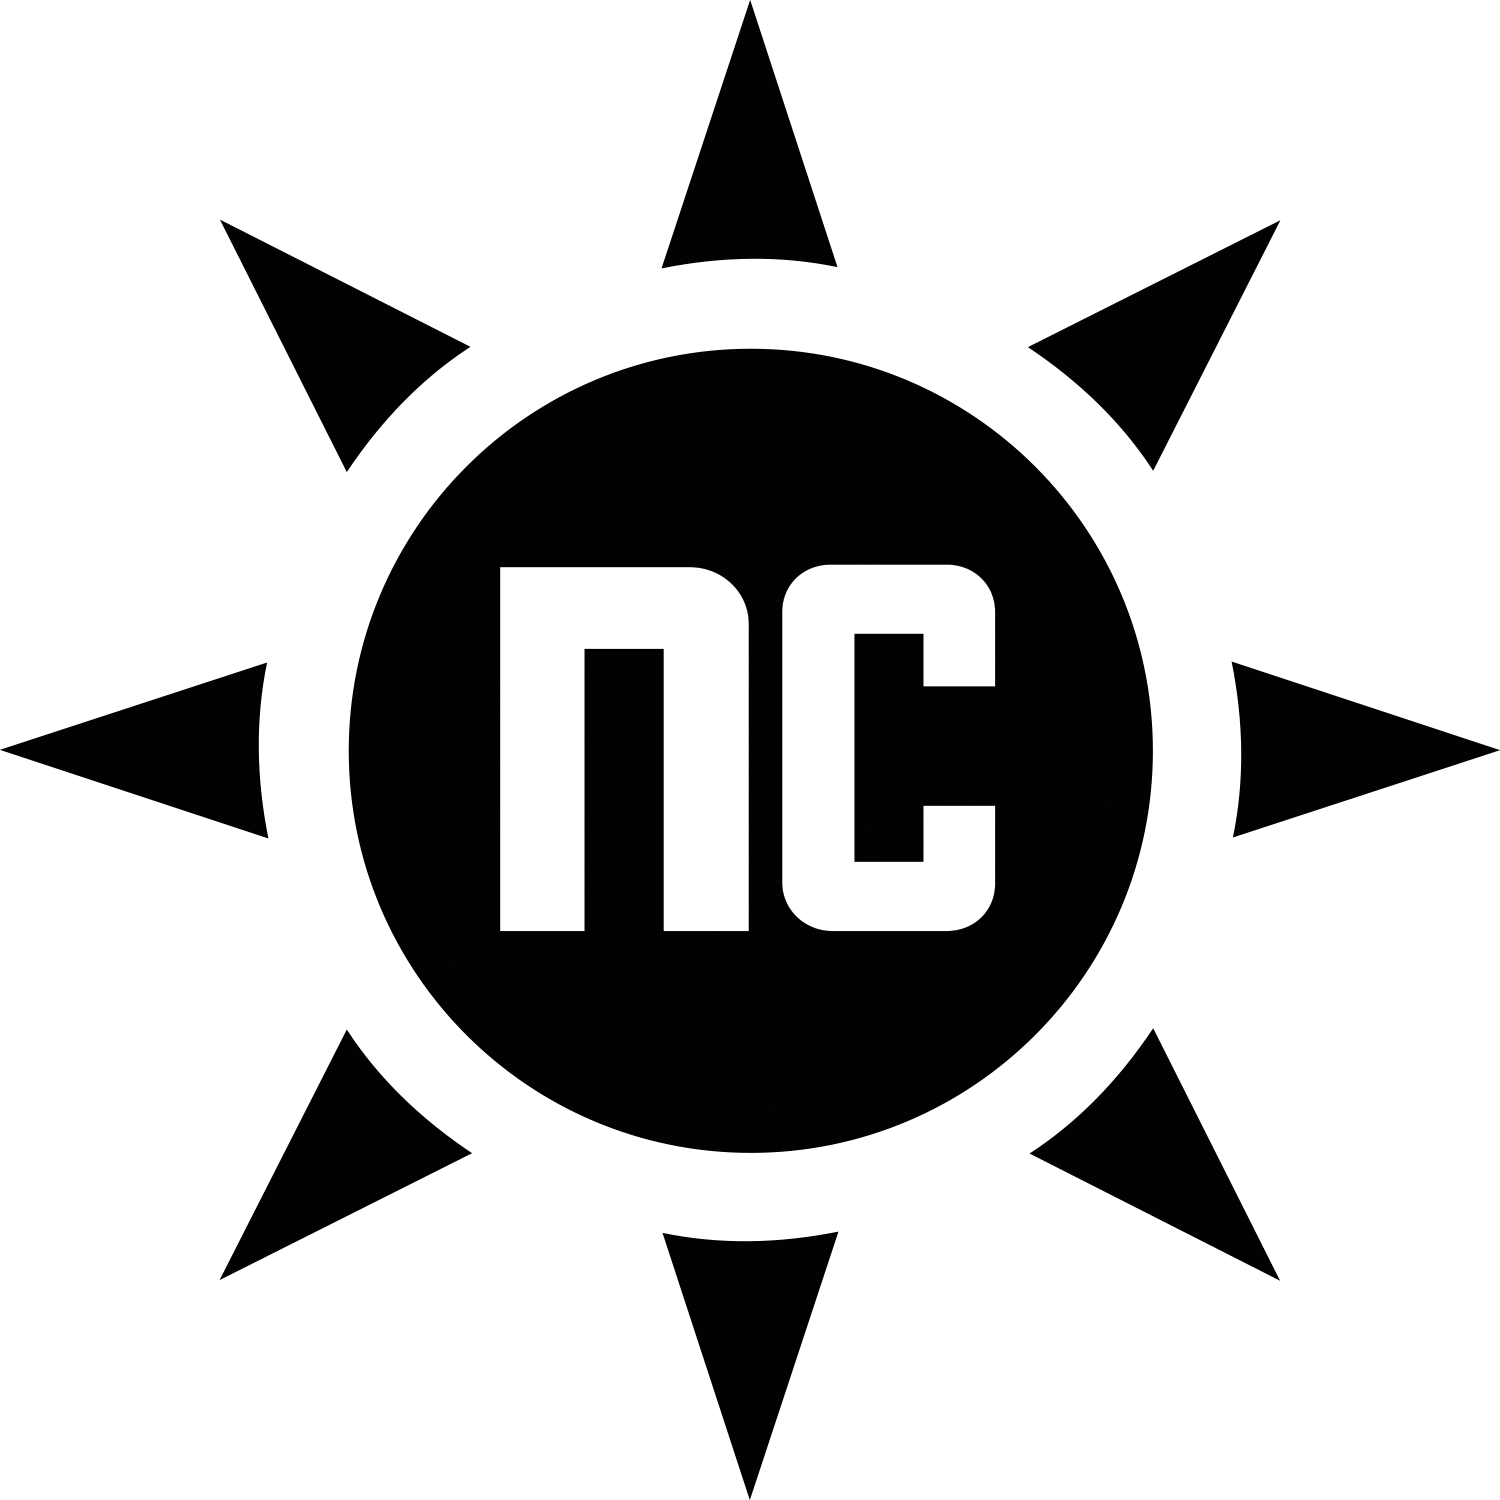 black sun logo with the letters "NC" in the center of the sun